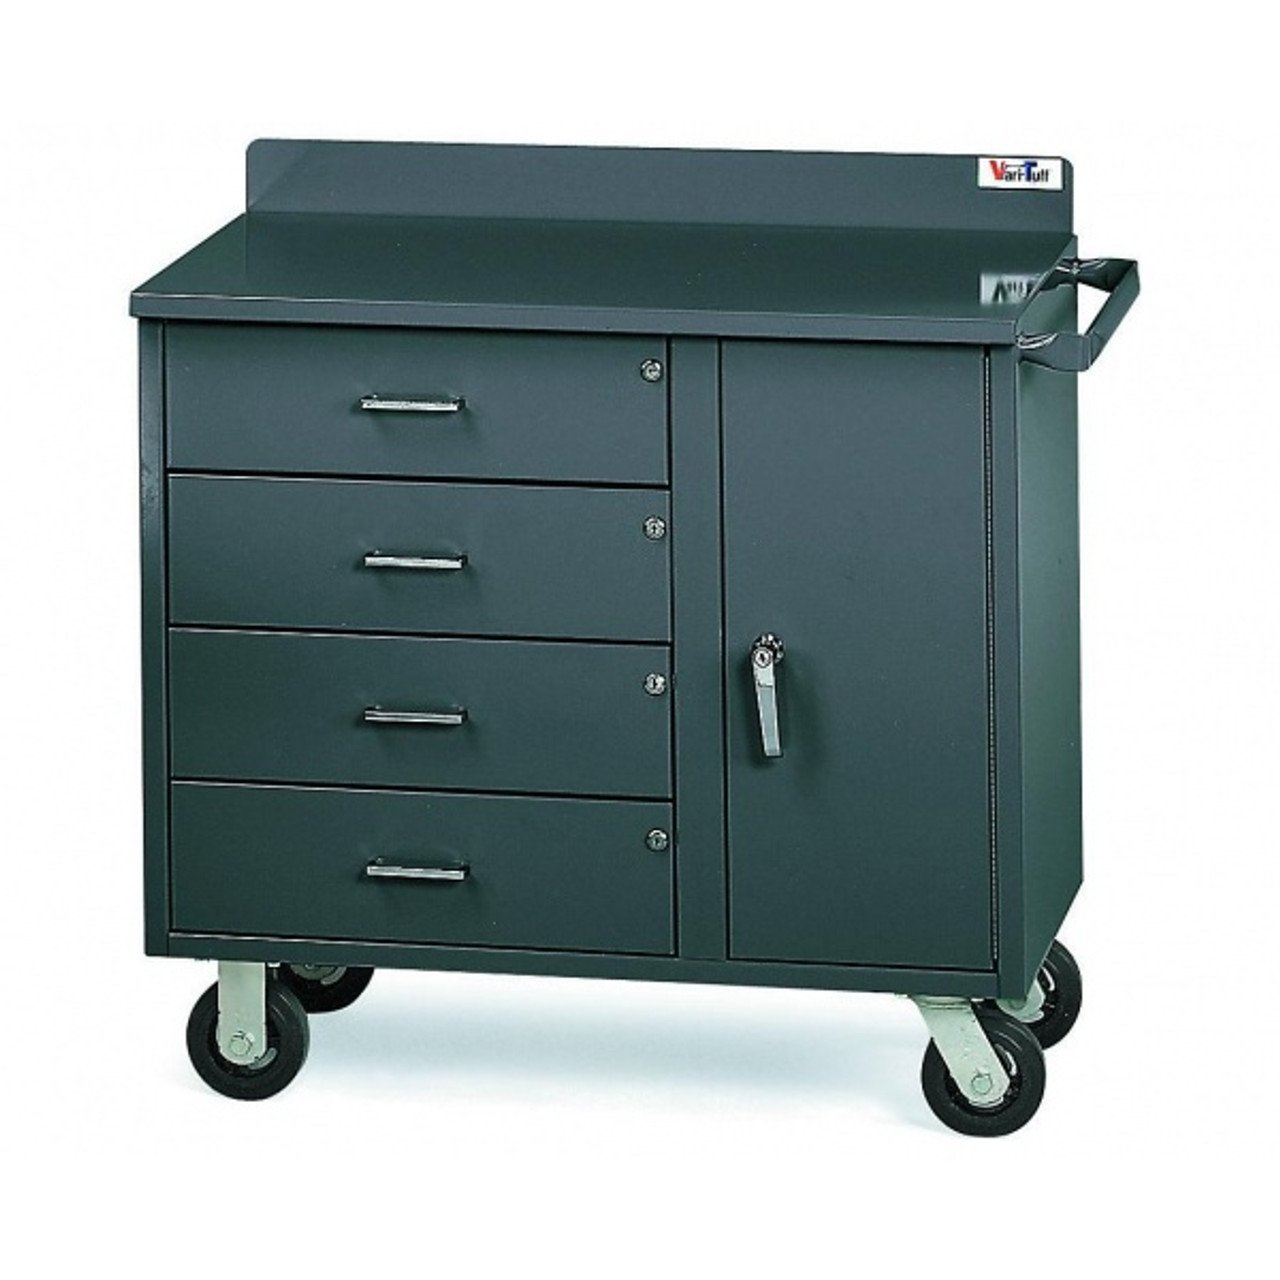 Valley Craft Mobile Industrial Workbench 36"Wx34"Hx21"D - 4 Drawers & 1 Door (no shelf) (CALL FOR BEST PRICING)